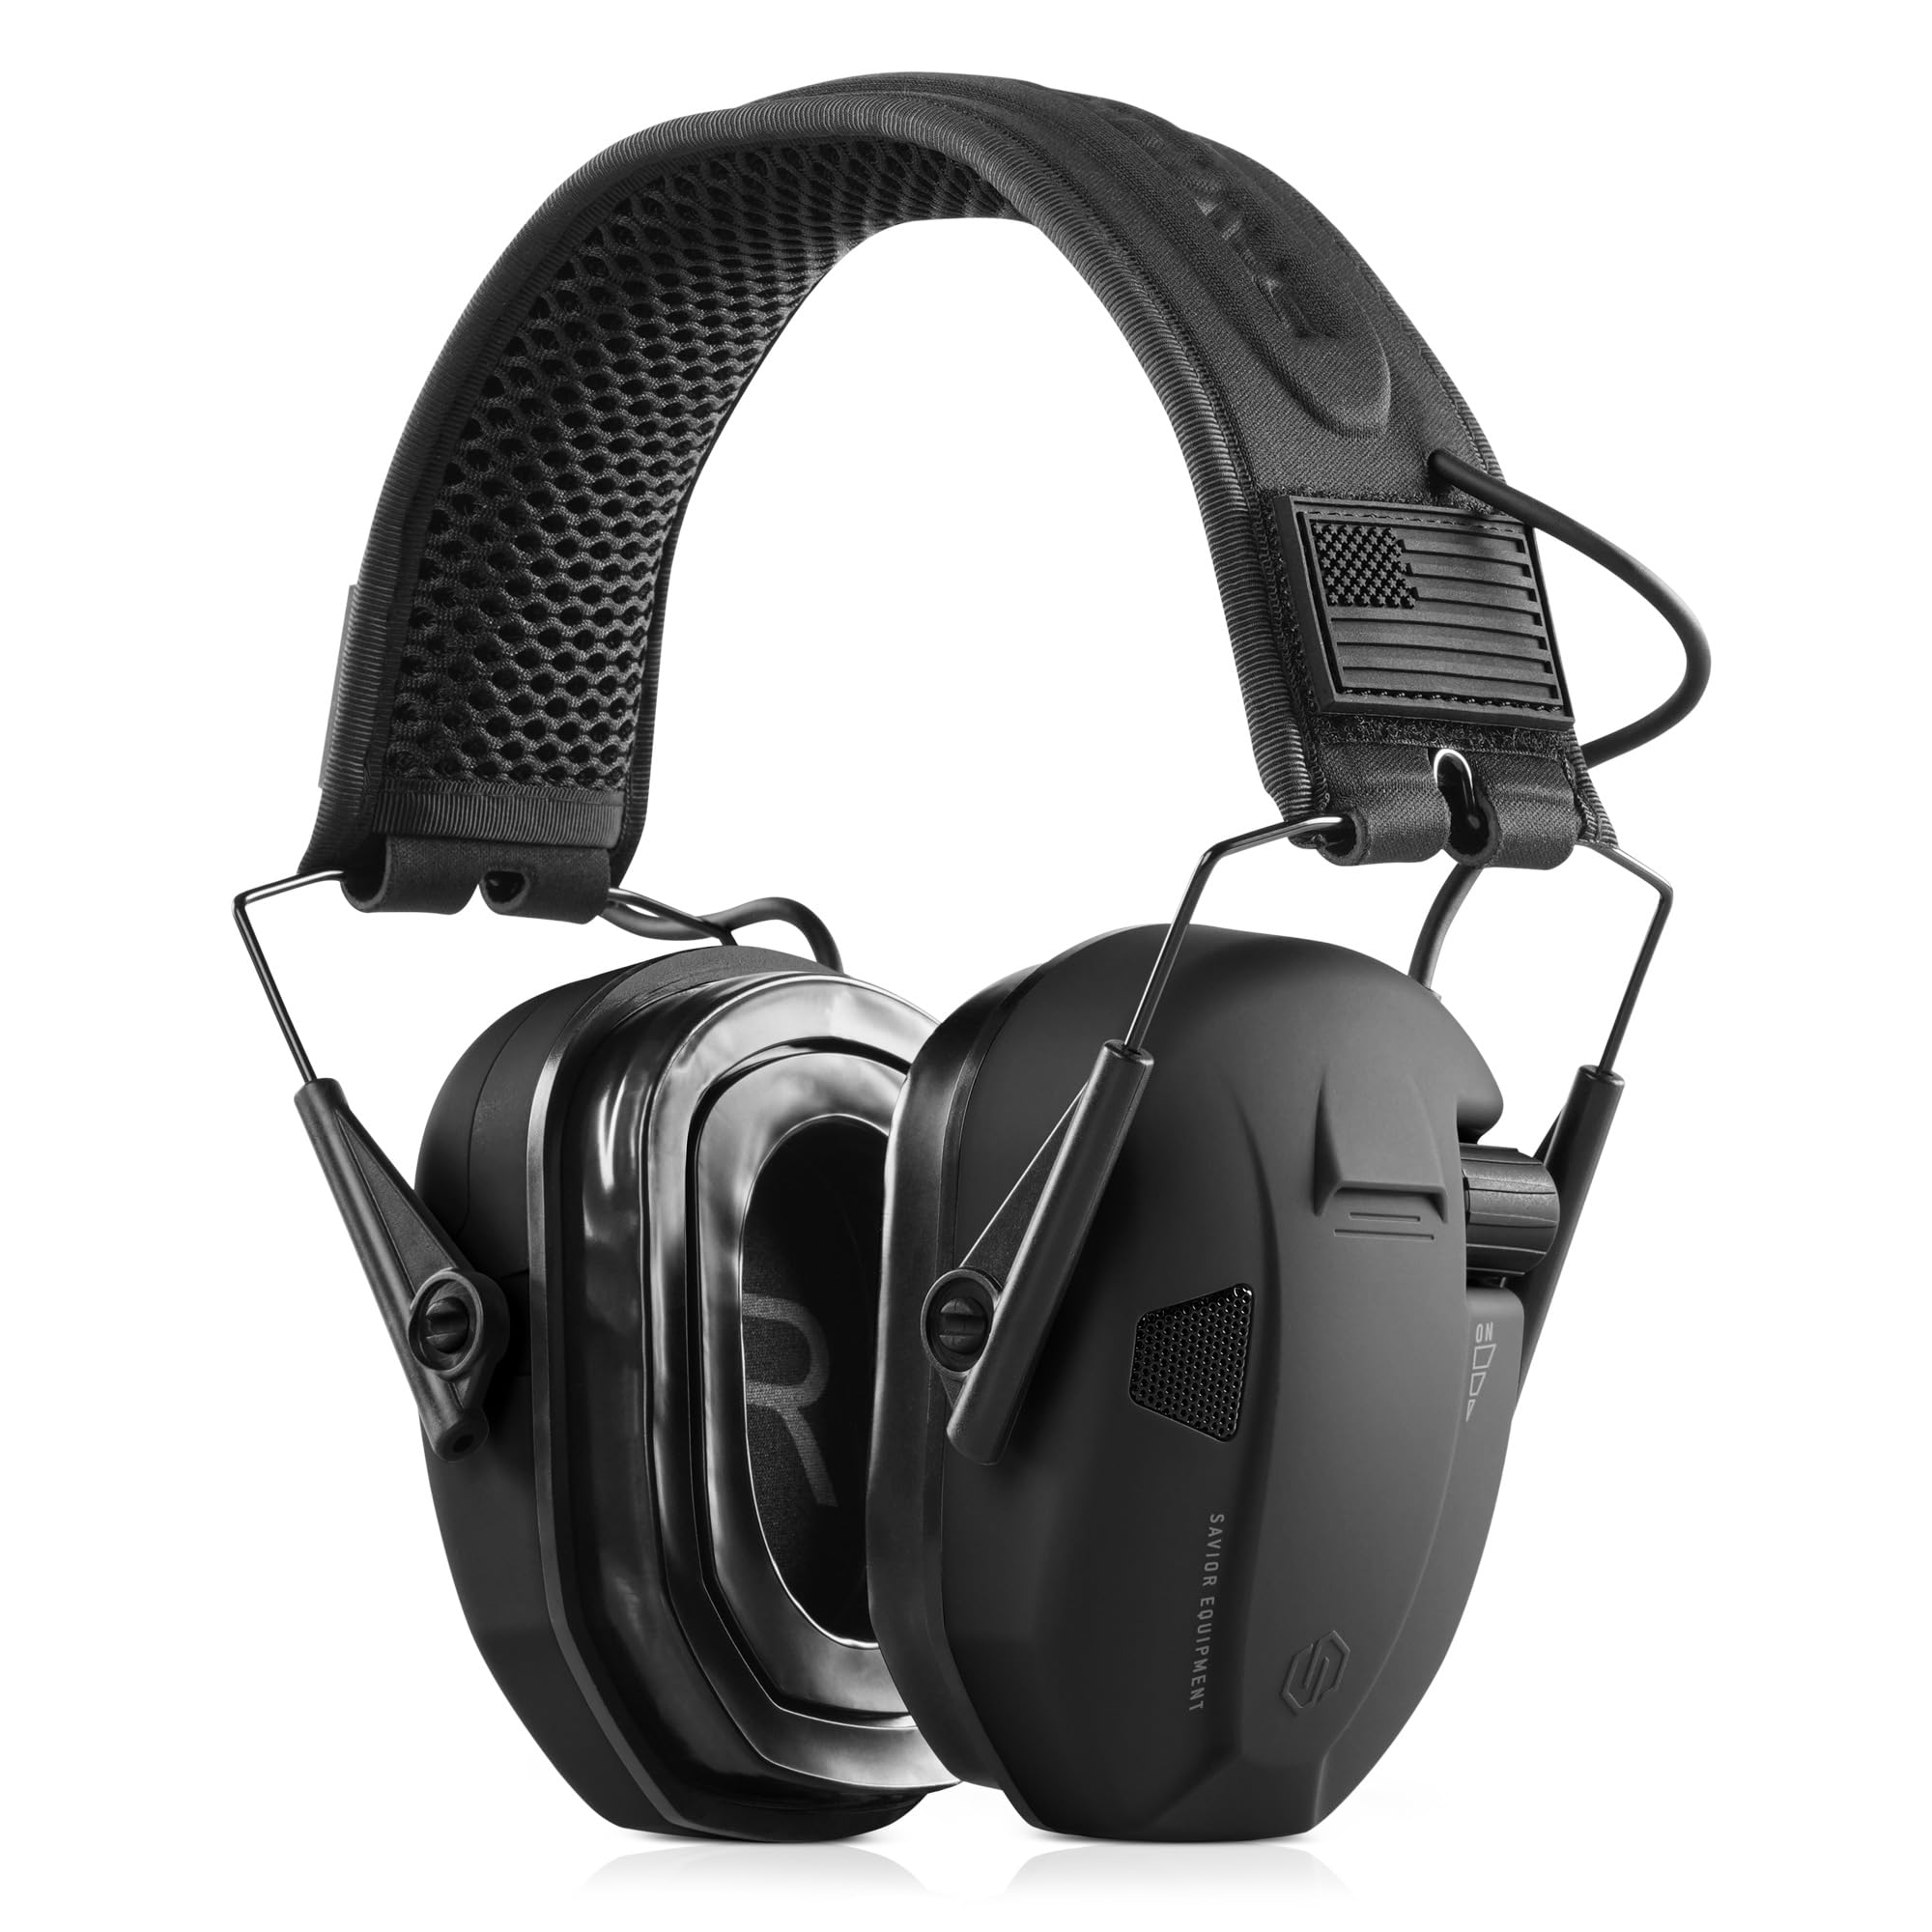 Savior Equipment Apollo Electronic Earmuffs For Shooting w/Gel Ear Pads, 24dB NRR, Noise Cancelling Ear Protection Headset $17.99